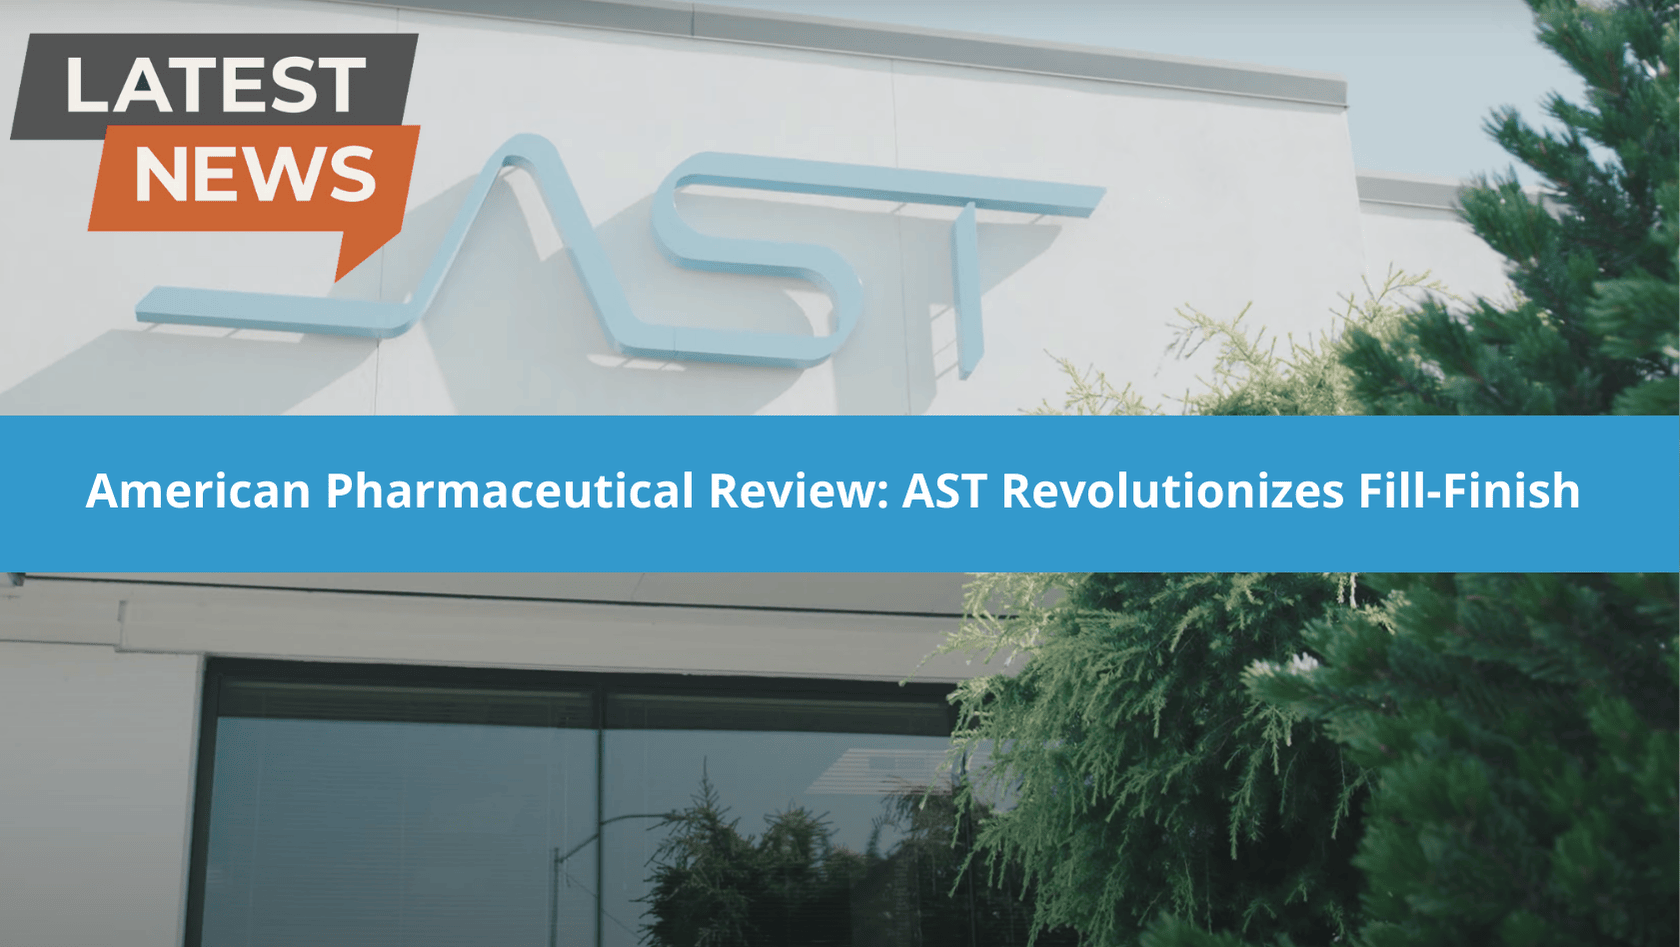 AST Revolutionizes Fill-Finish: American Pharmaceutical Review’s interview with Josh Russell